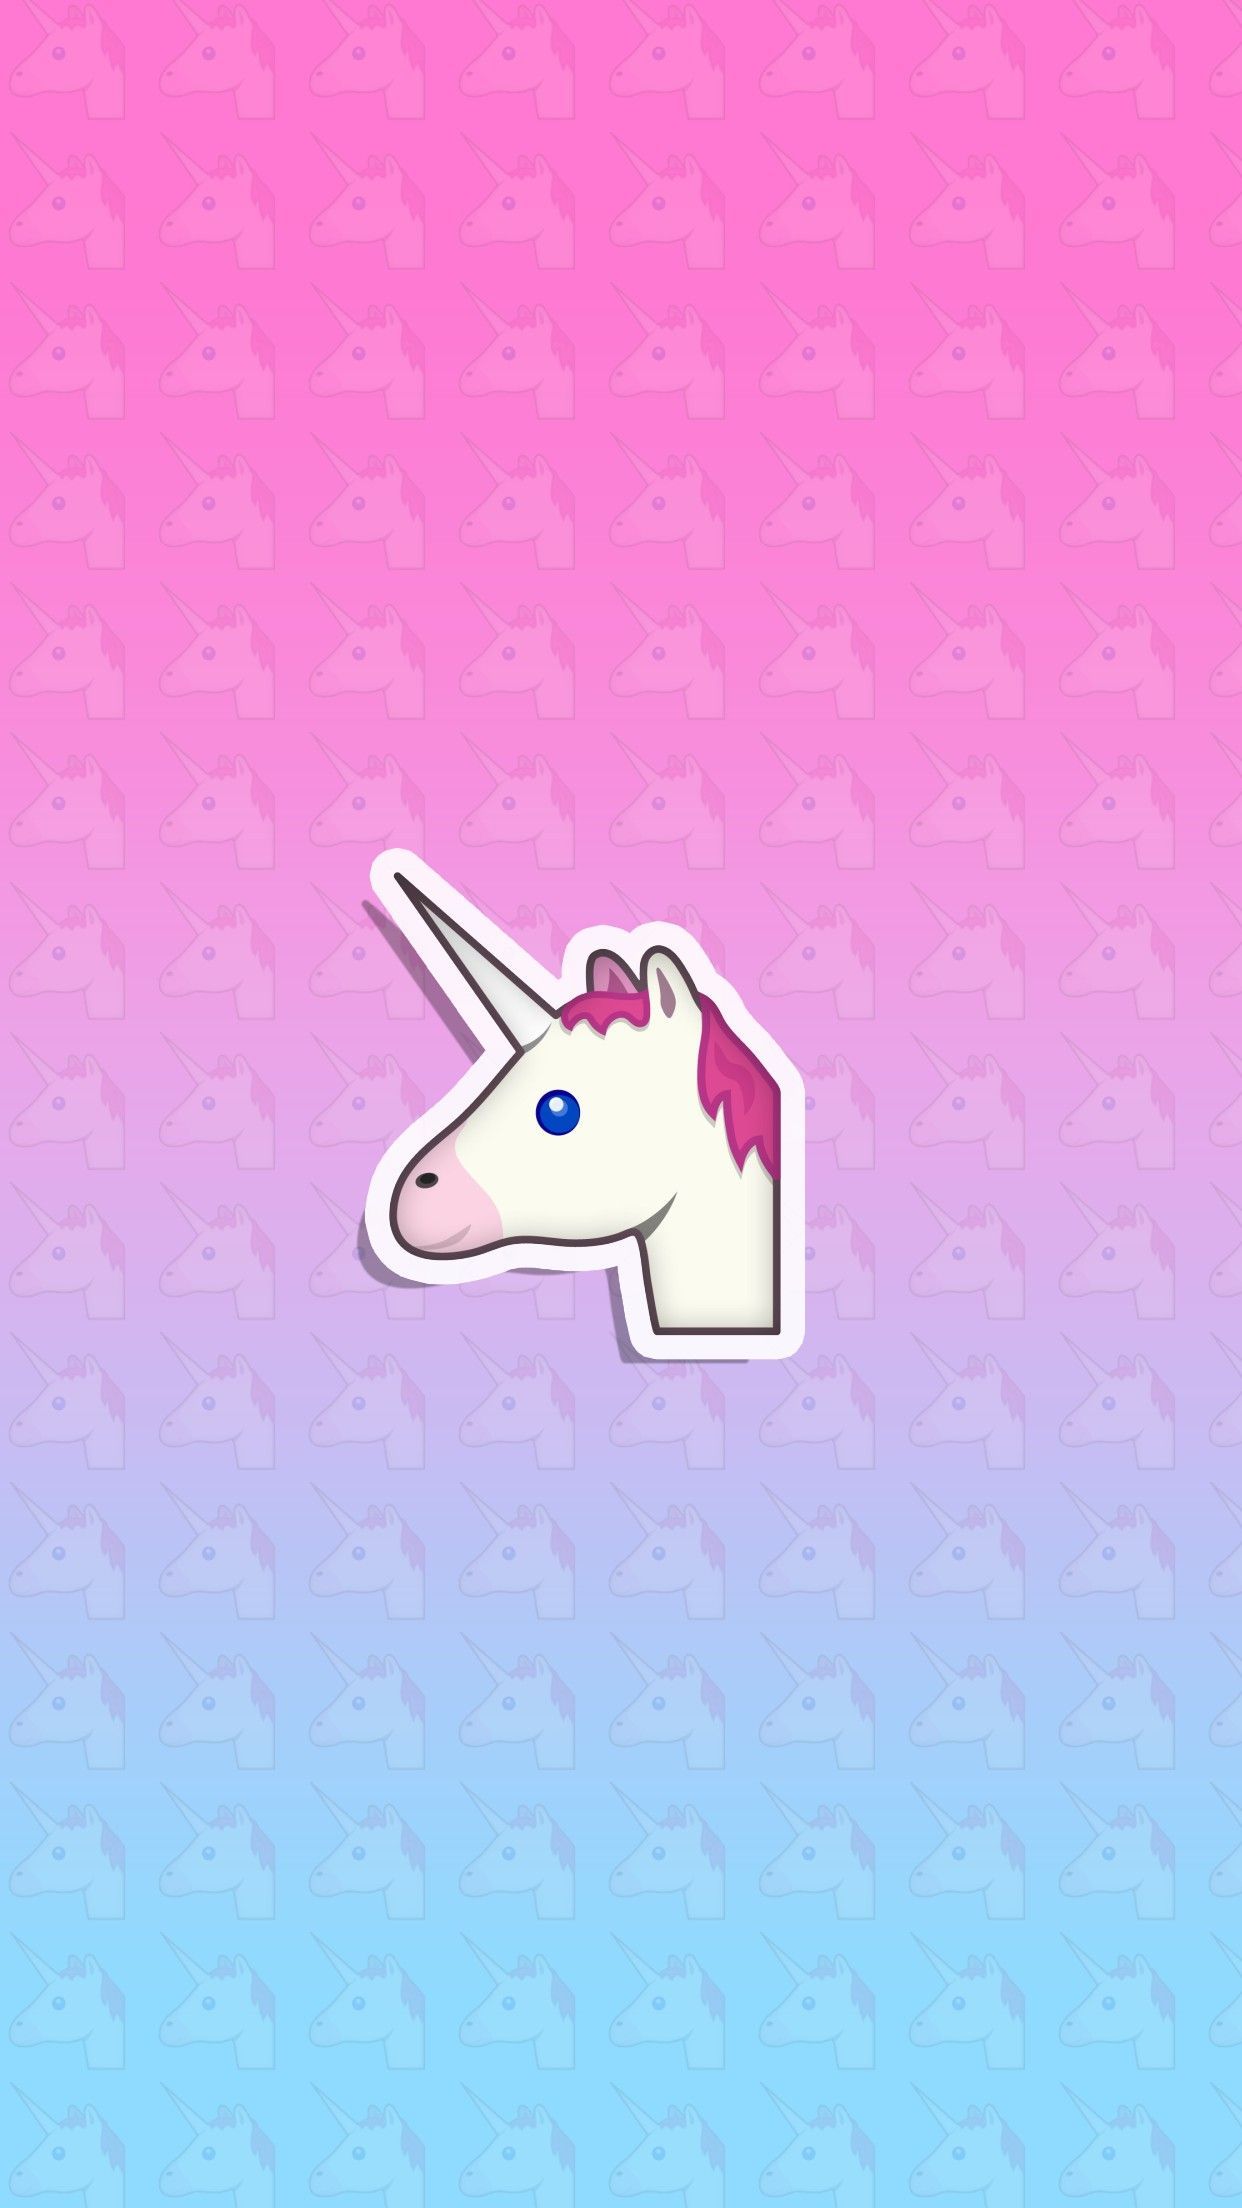 Wallpaper, background, iPhone, Android, HD, unicorn, Pink, Blue, purple, ombre, gradient. Pink unicorn wallpaper, Unicorn emoji wallpaper, Unicorn wallpaper